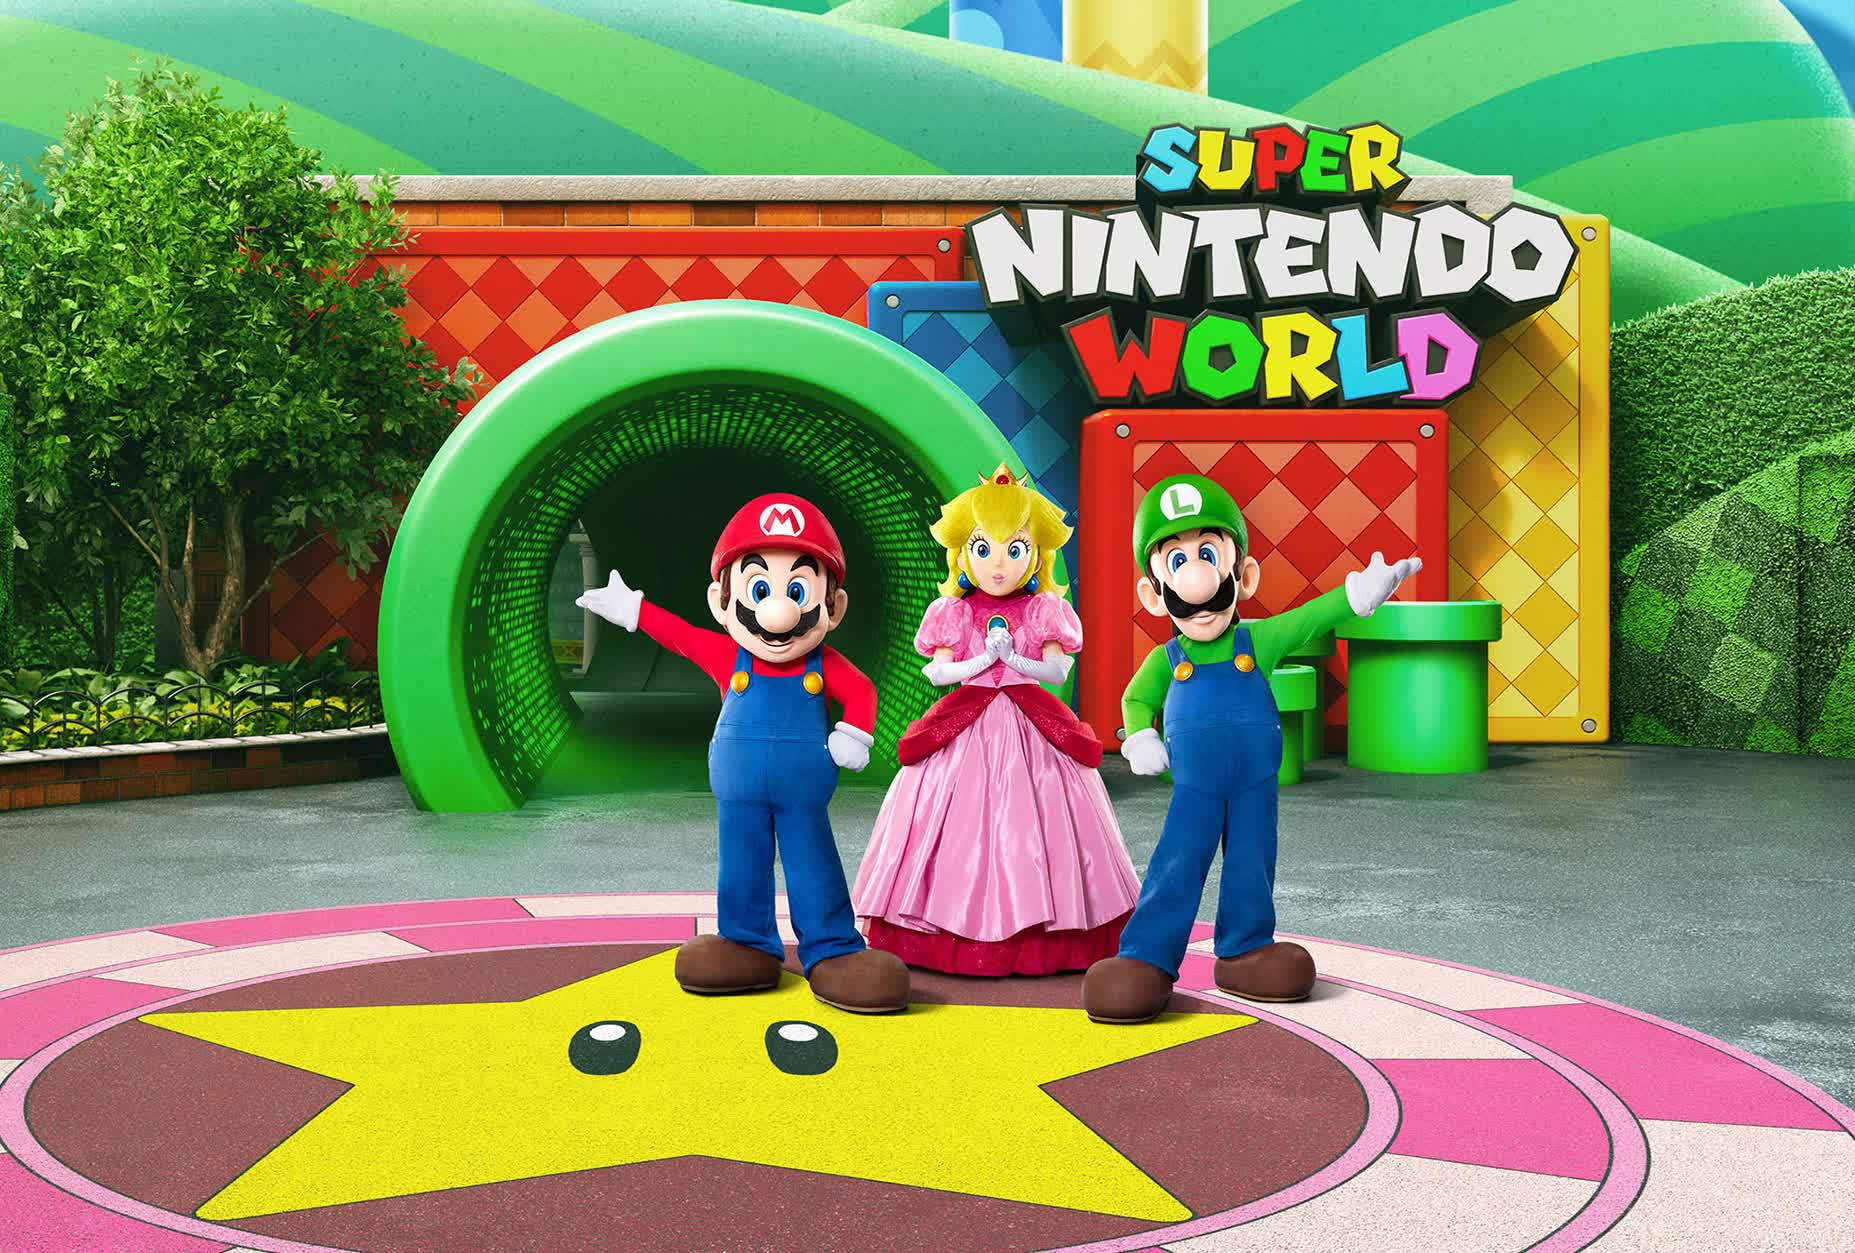 Super Nintendo World opens at Universal Studios Hollywood in February